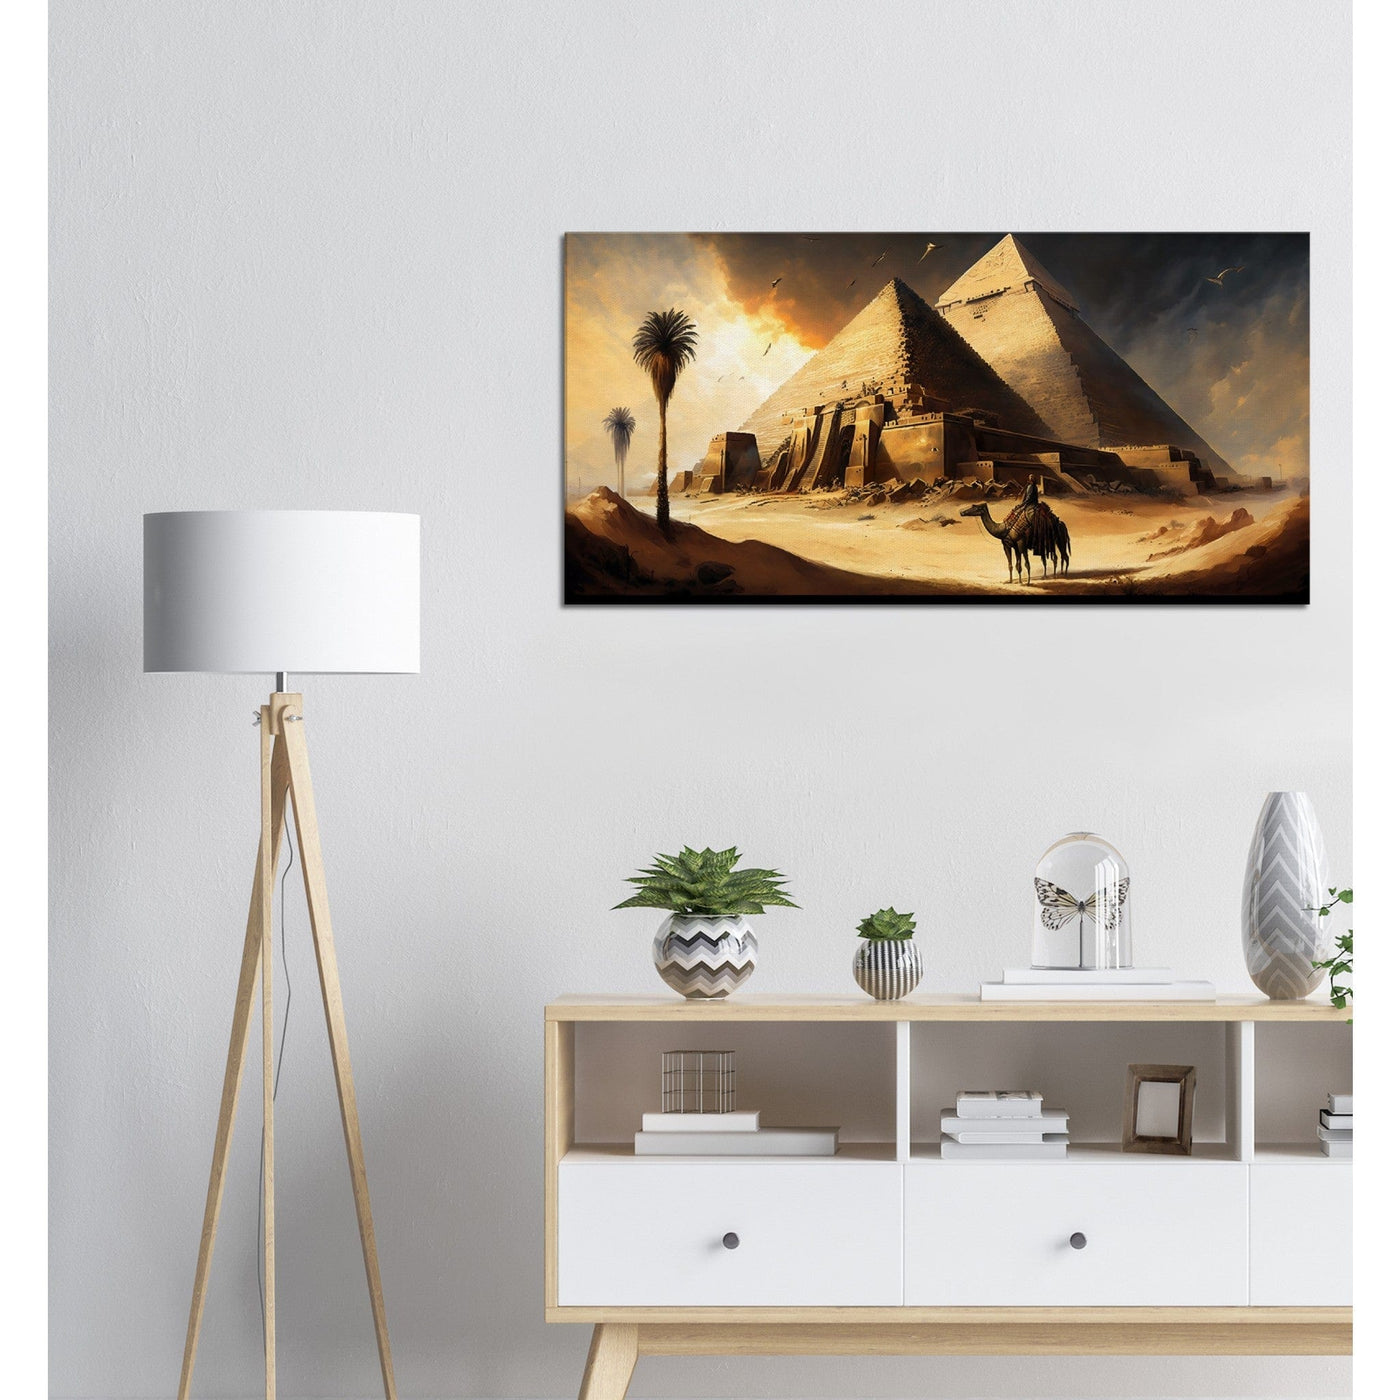 Ancient Pyramids: The Stairway to the Heavens - Oil Painting Printed Canvas. 50X100.